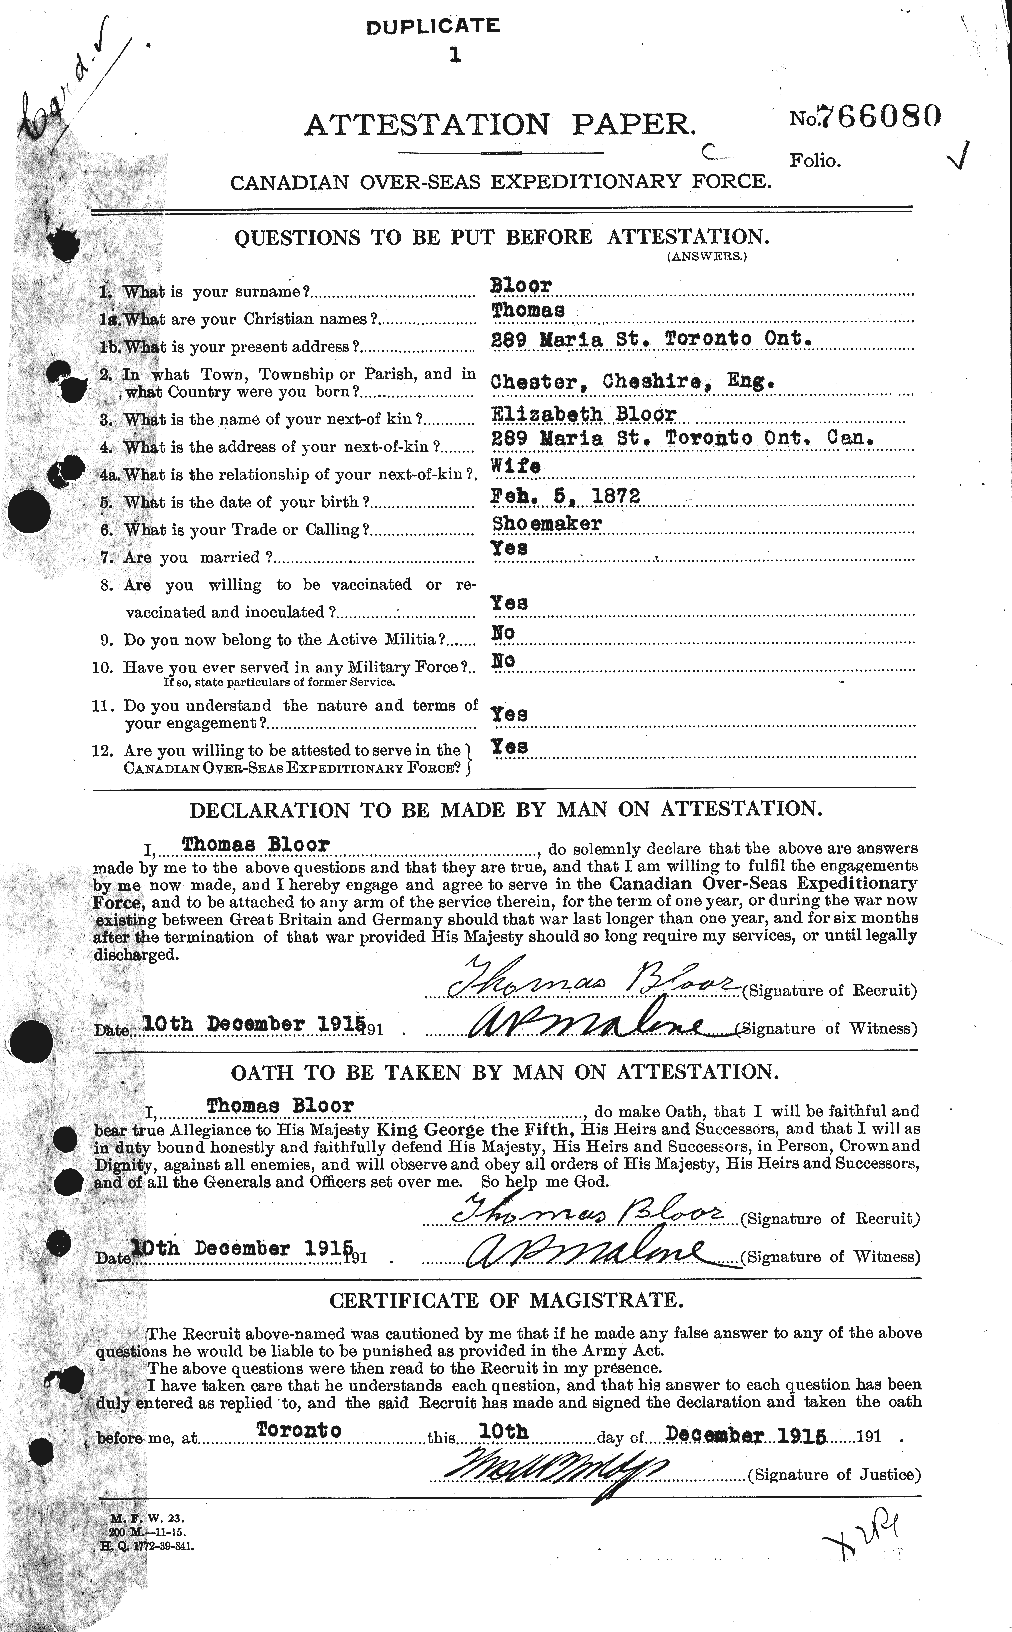 Personnel Records of the First World War - CEF 248647a